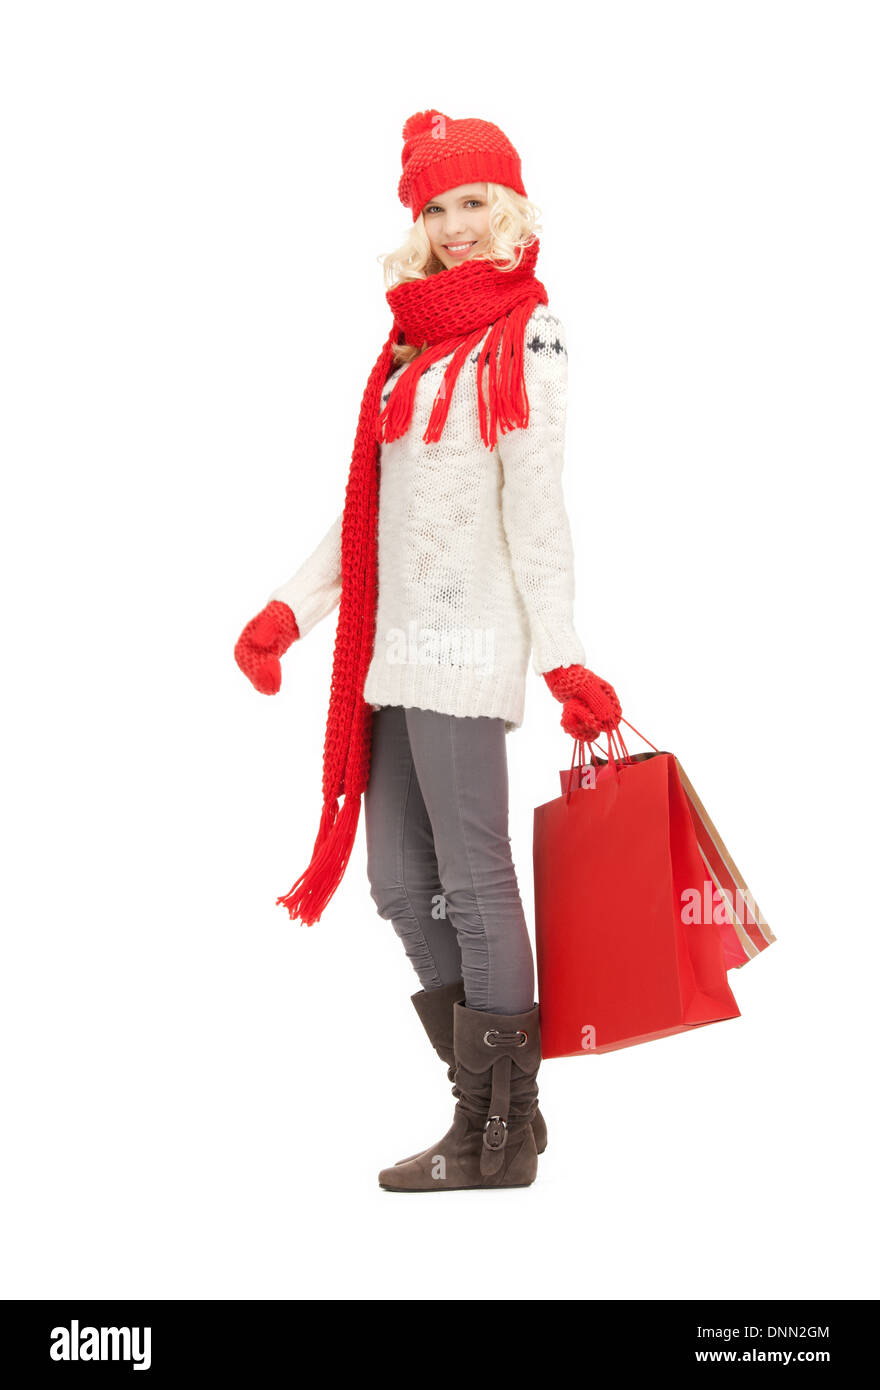 young girl with shopping bags Stock Photo